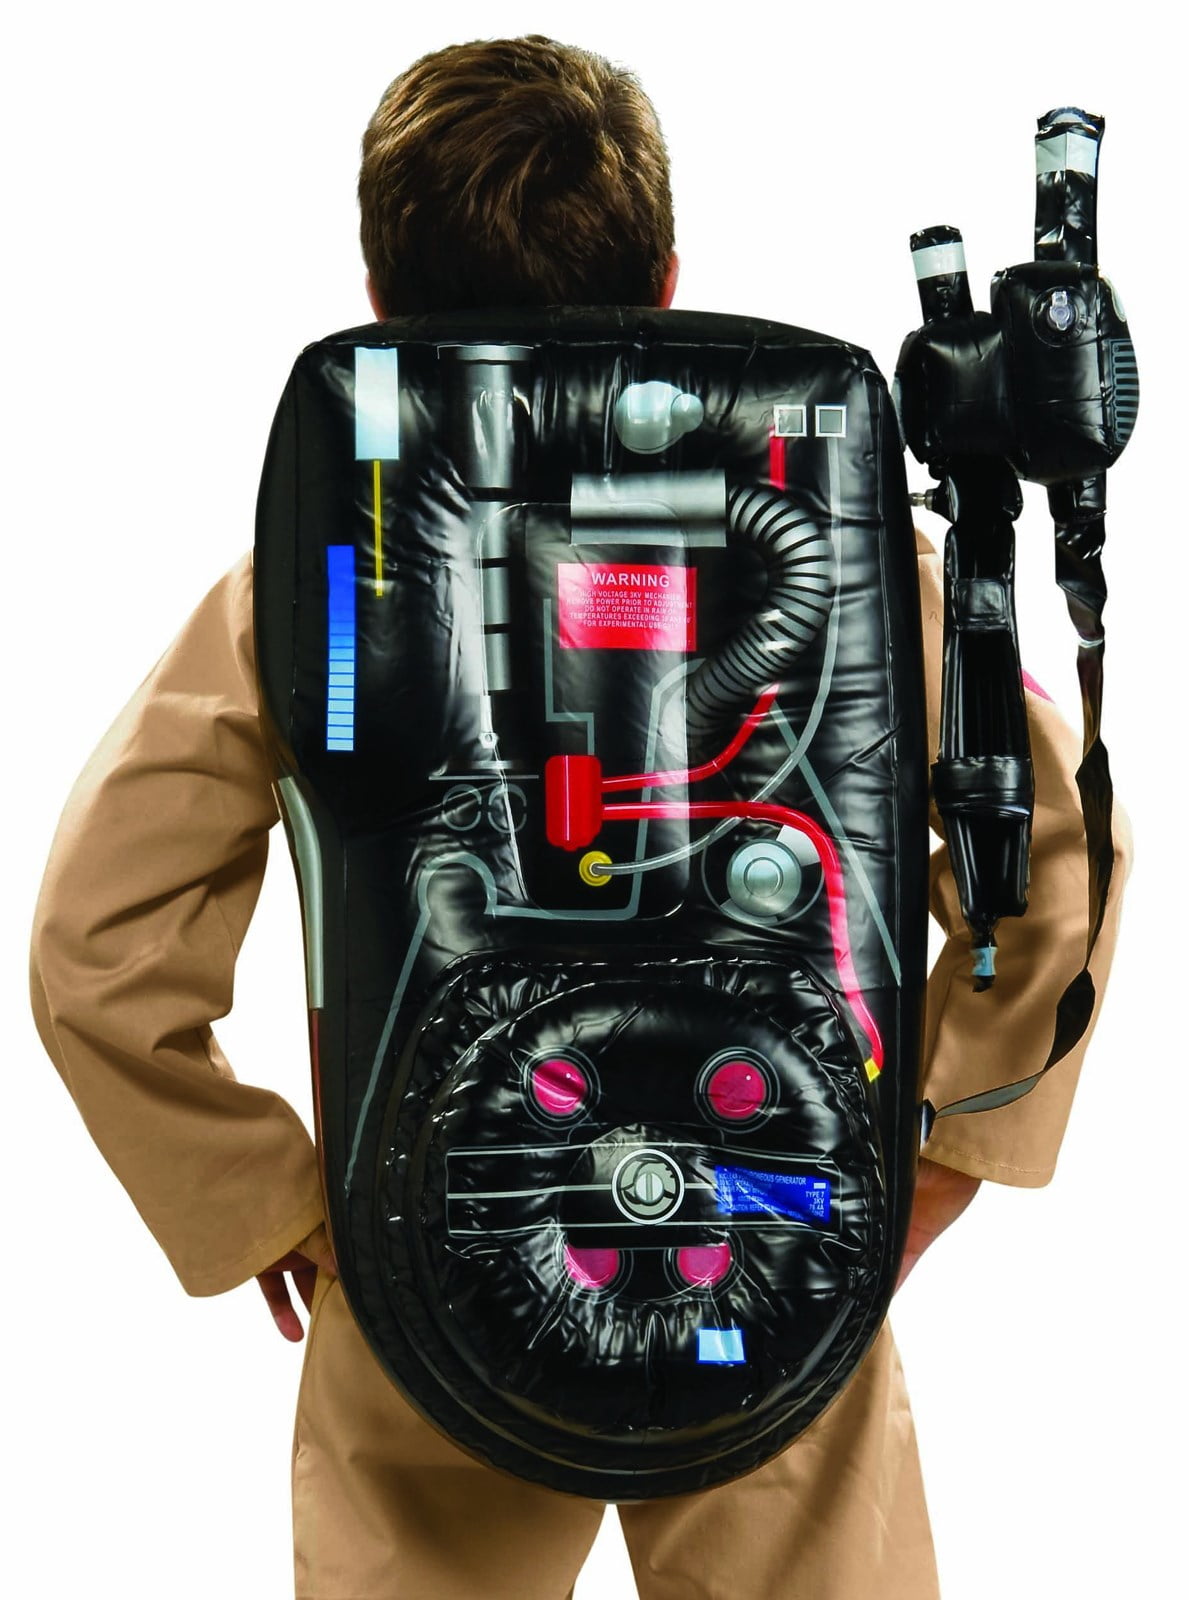 Ghostbusters Who You Gonna Call Ghost Trap Backpack Daypack Rucksack Laptop Shoulder Bag with USB Charging Port